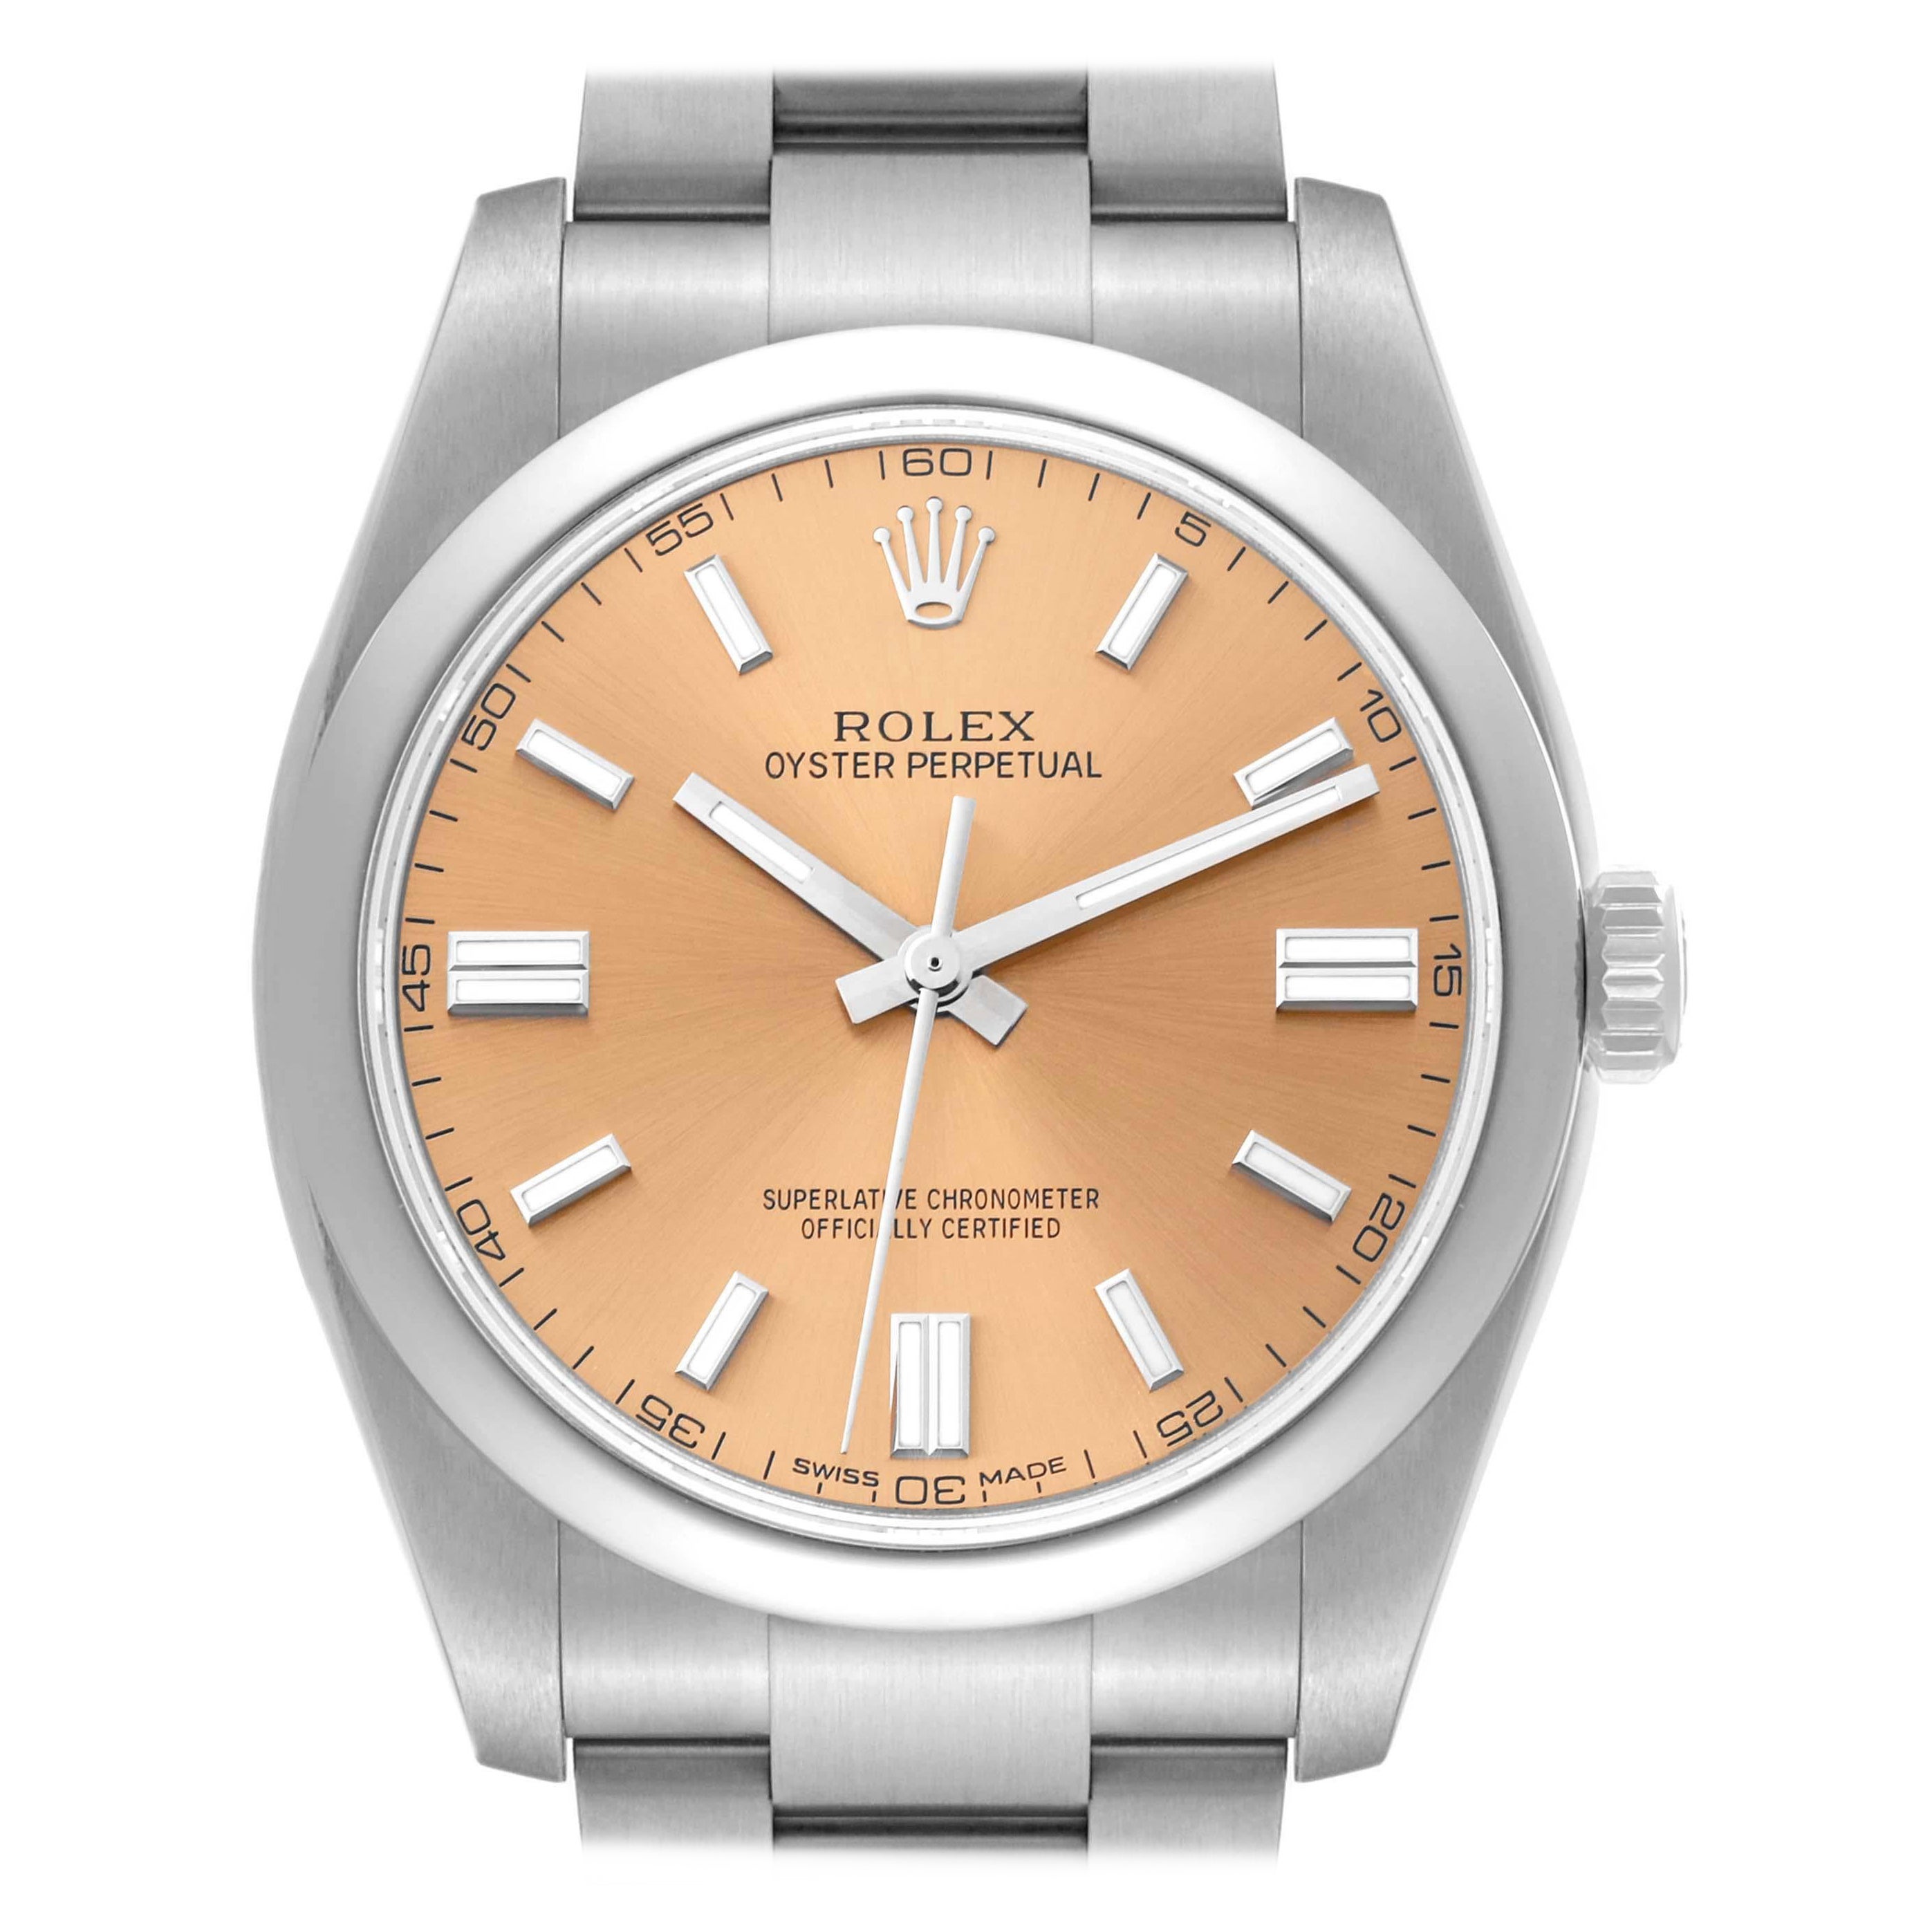 Rolex Oyster Perpetual 36 White Grape Dial Steel Mens Watch 116000 Box Card For Sale